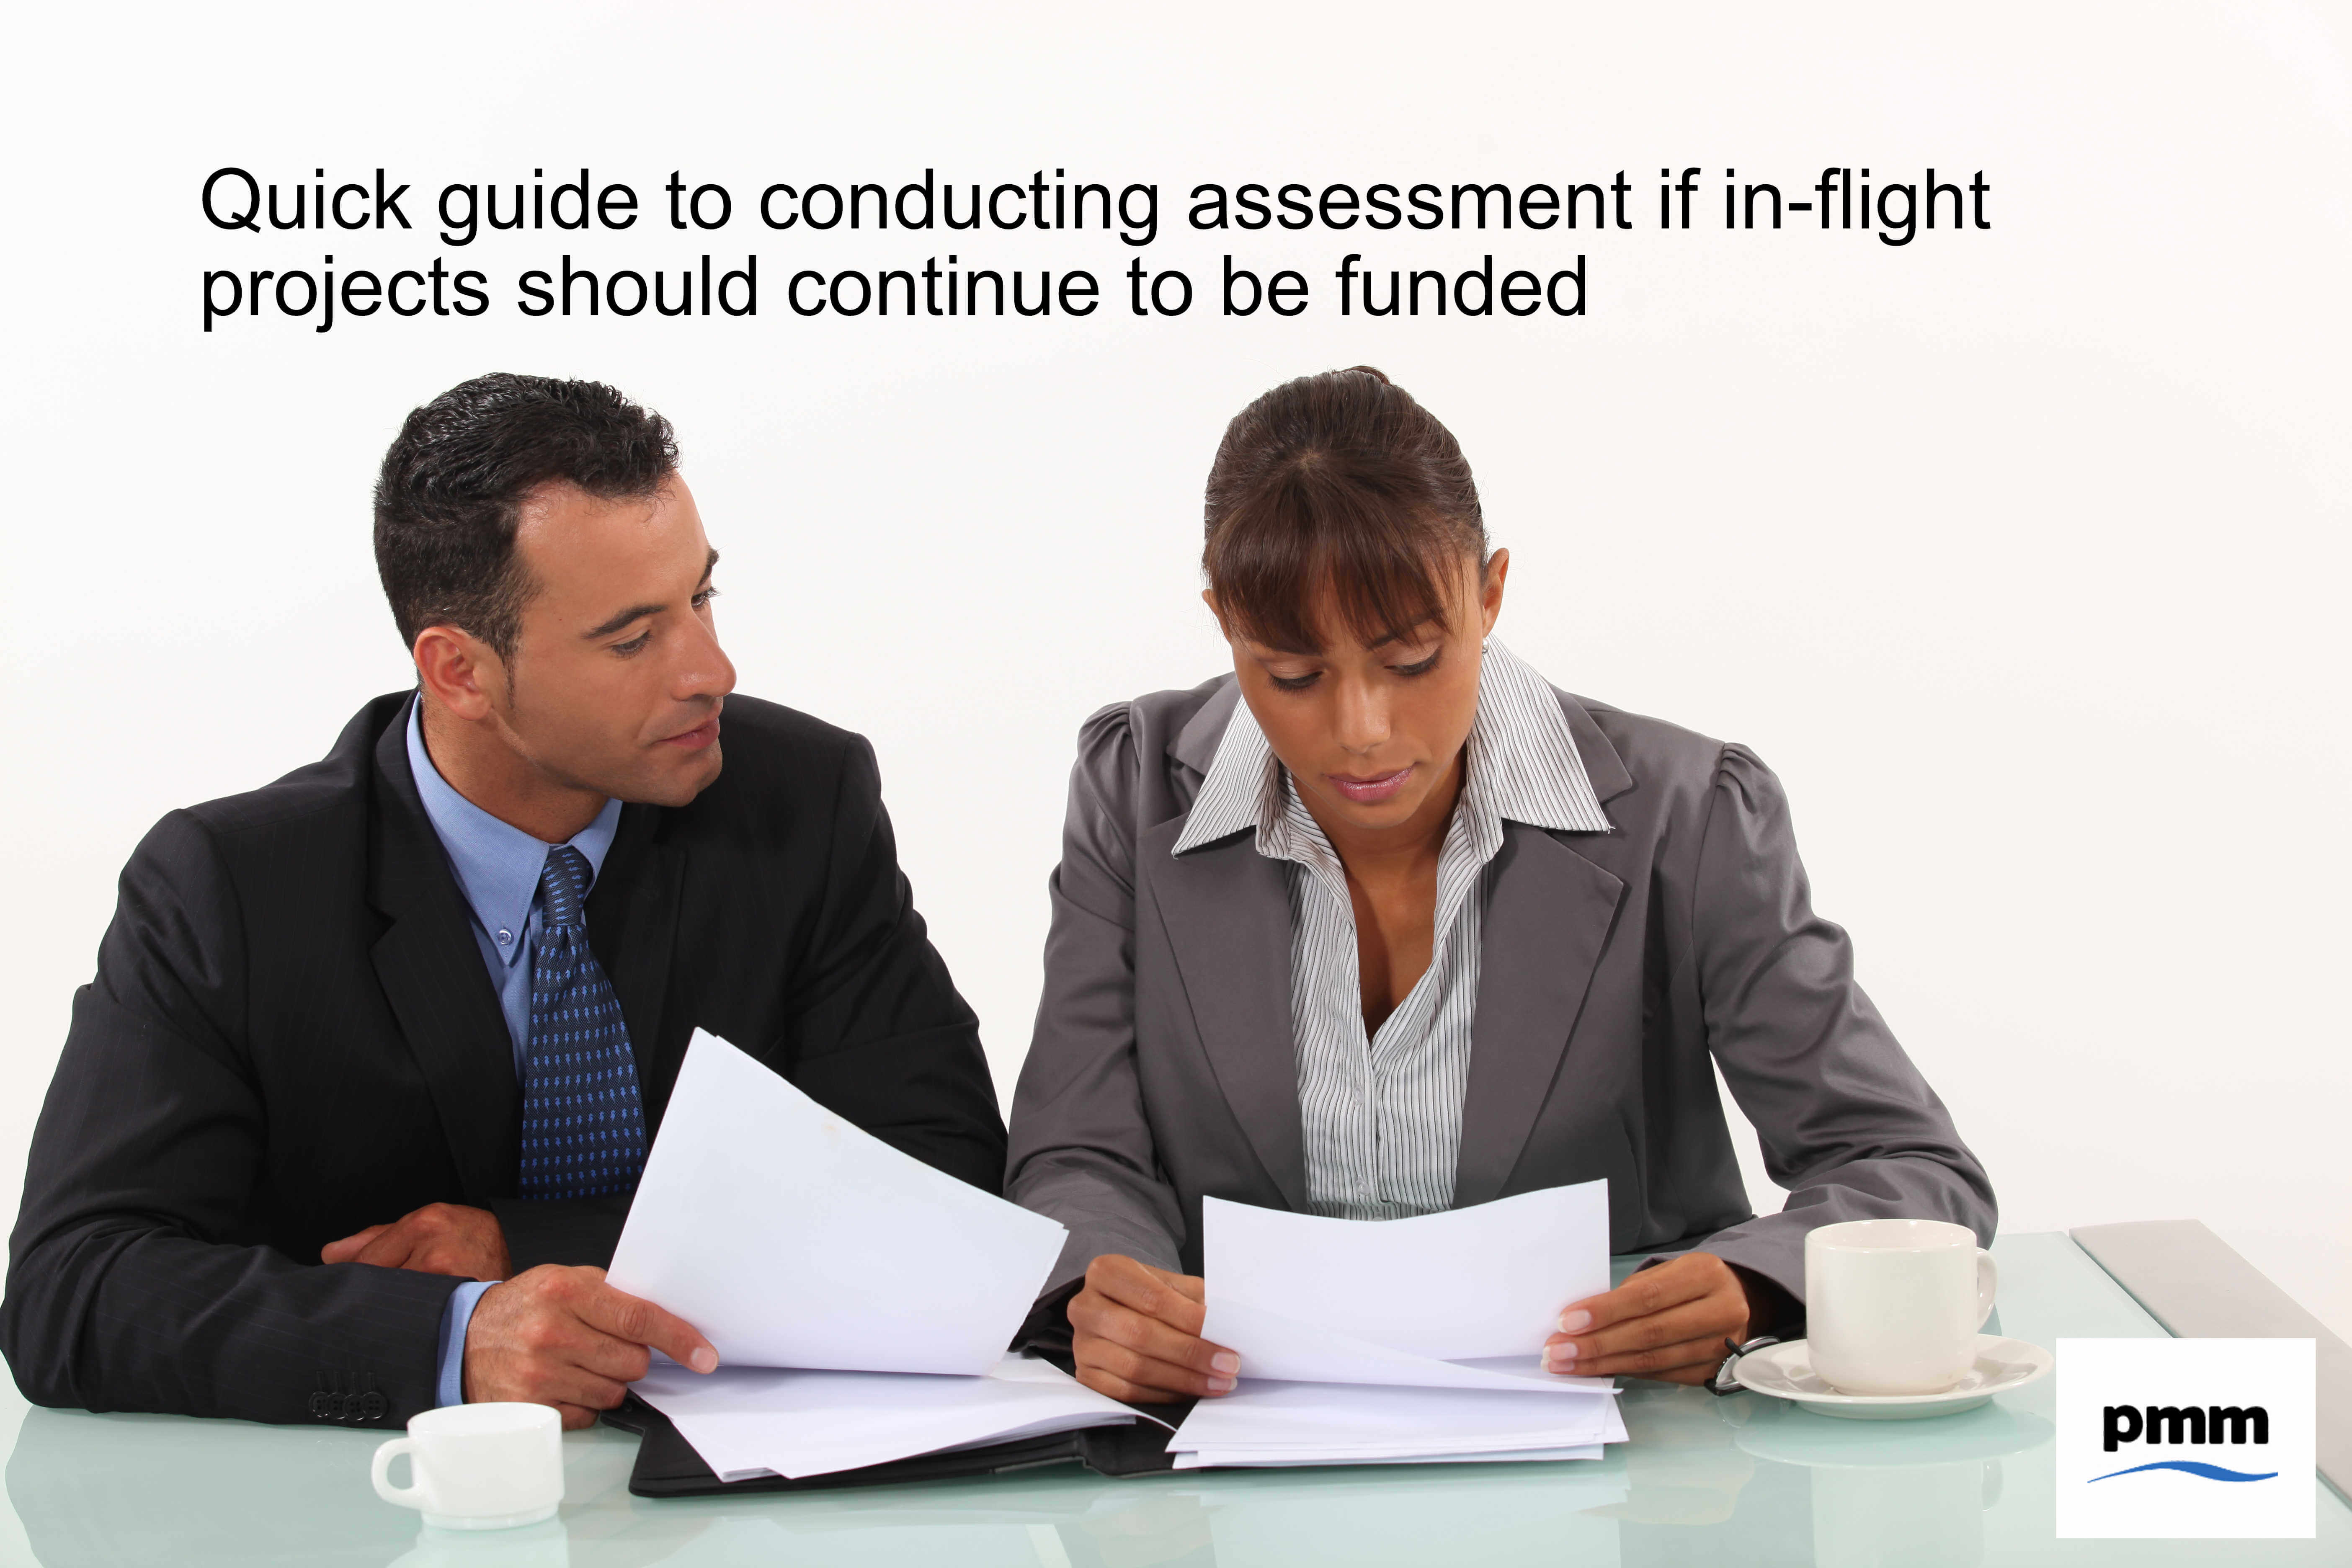 Quick guide to conducting assessment if in-flight projects should continue to be funded